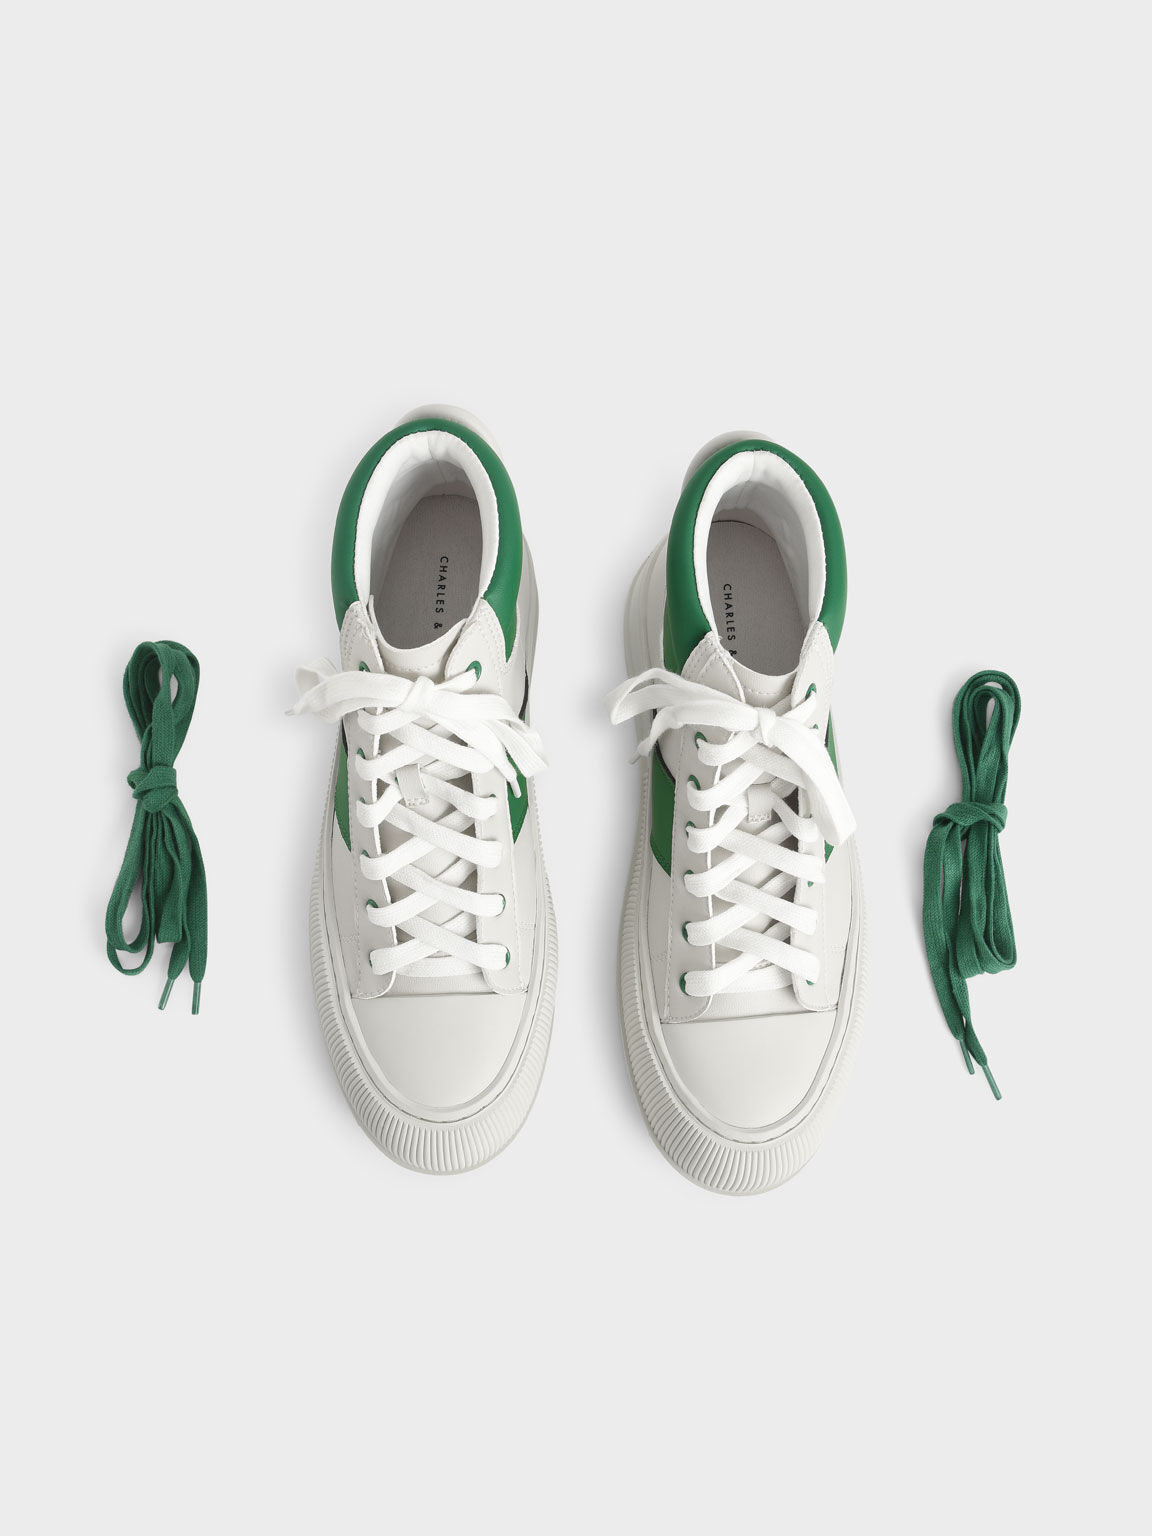 Two-Tone High-Top Sneakers, Green, hi-res